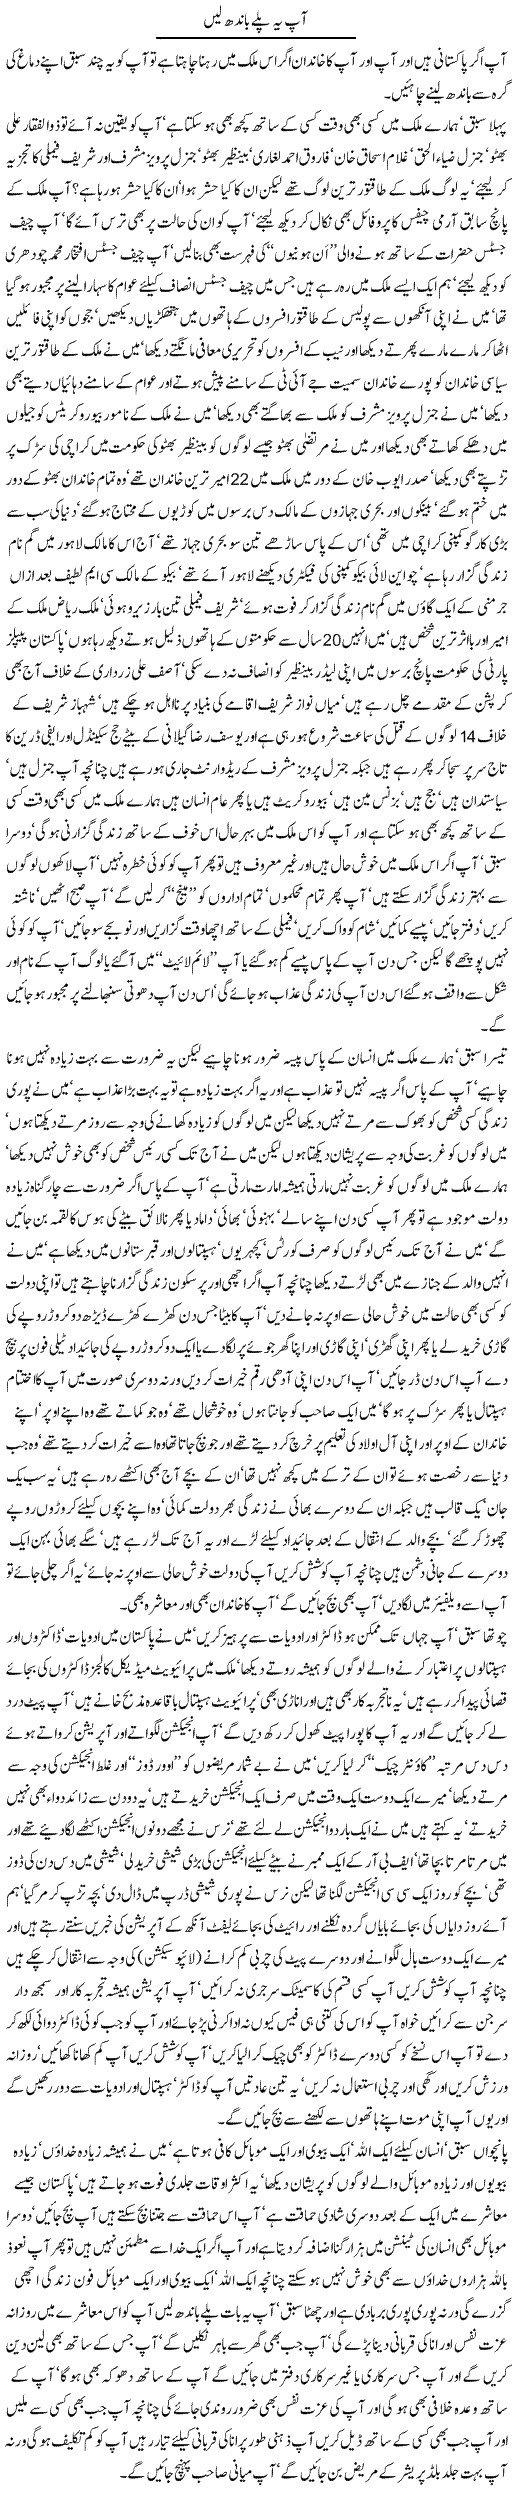 Aap Ye Pale Bandh Lain By Javed Chaudhry